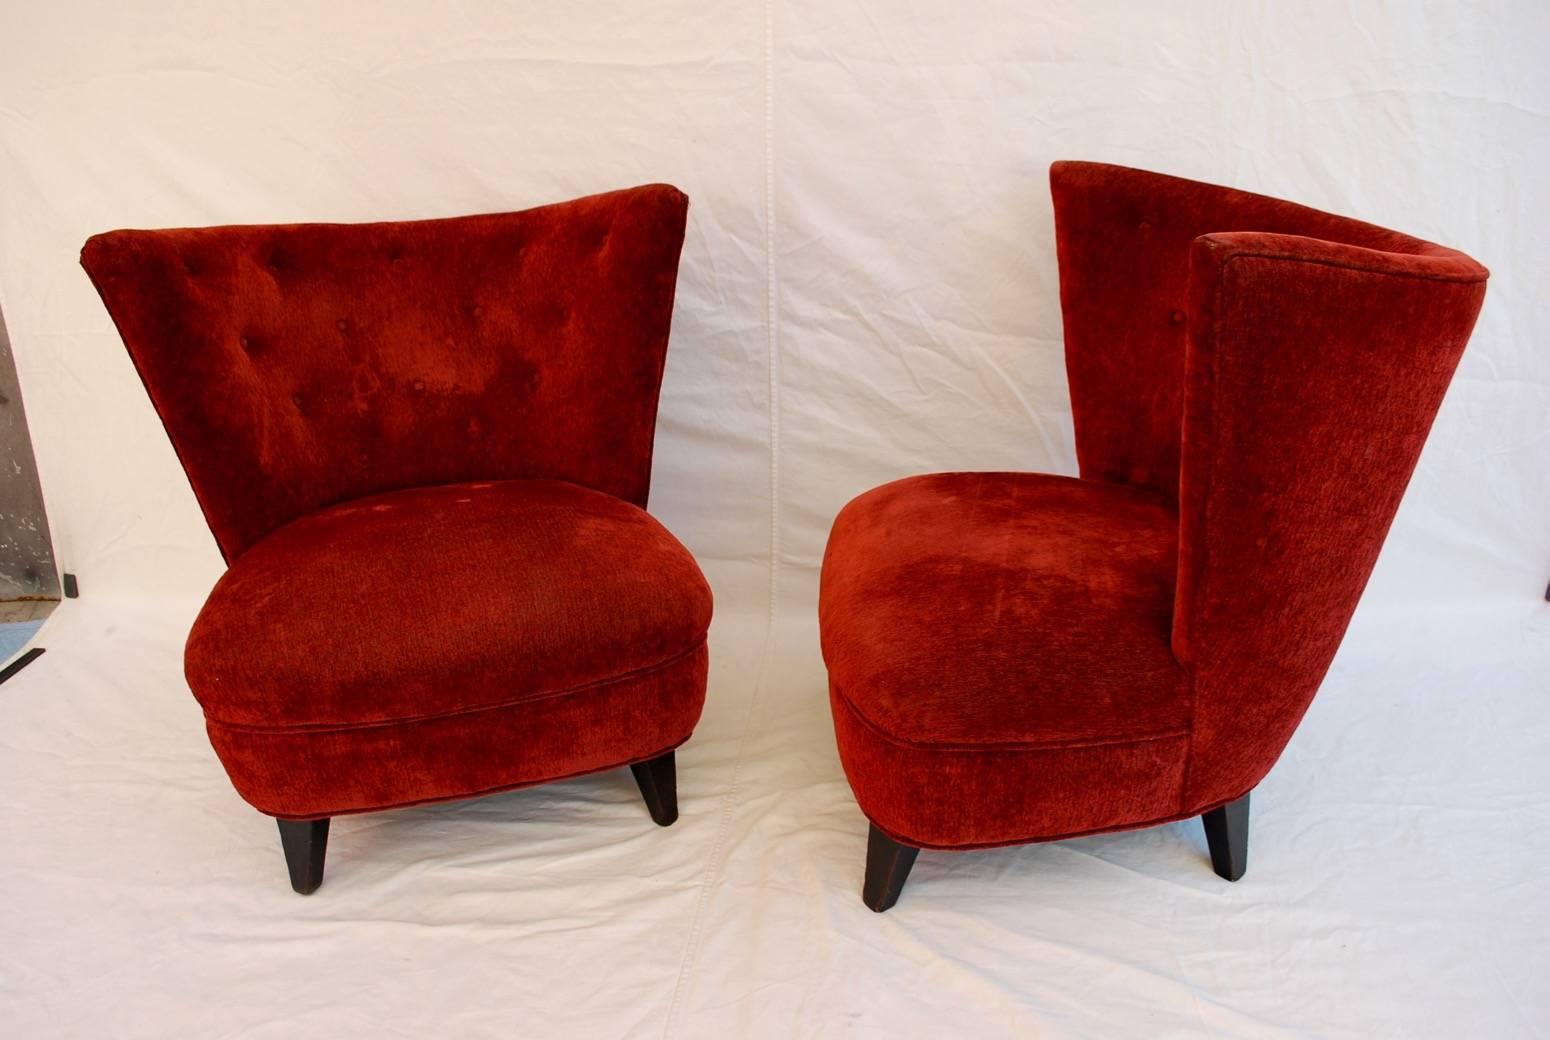 An elegant pair of lounge chairs by the iconic designer Gilbert Rohde, the color of the velvet is much more beautiful in person, it has a deep burgundy color.